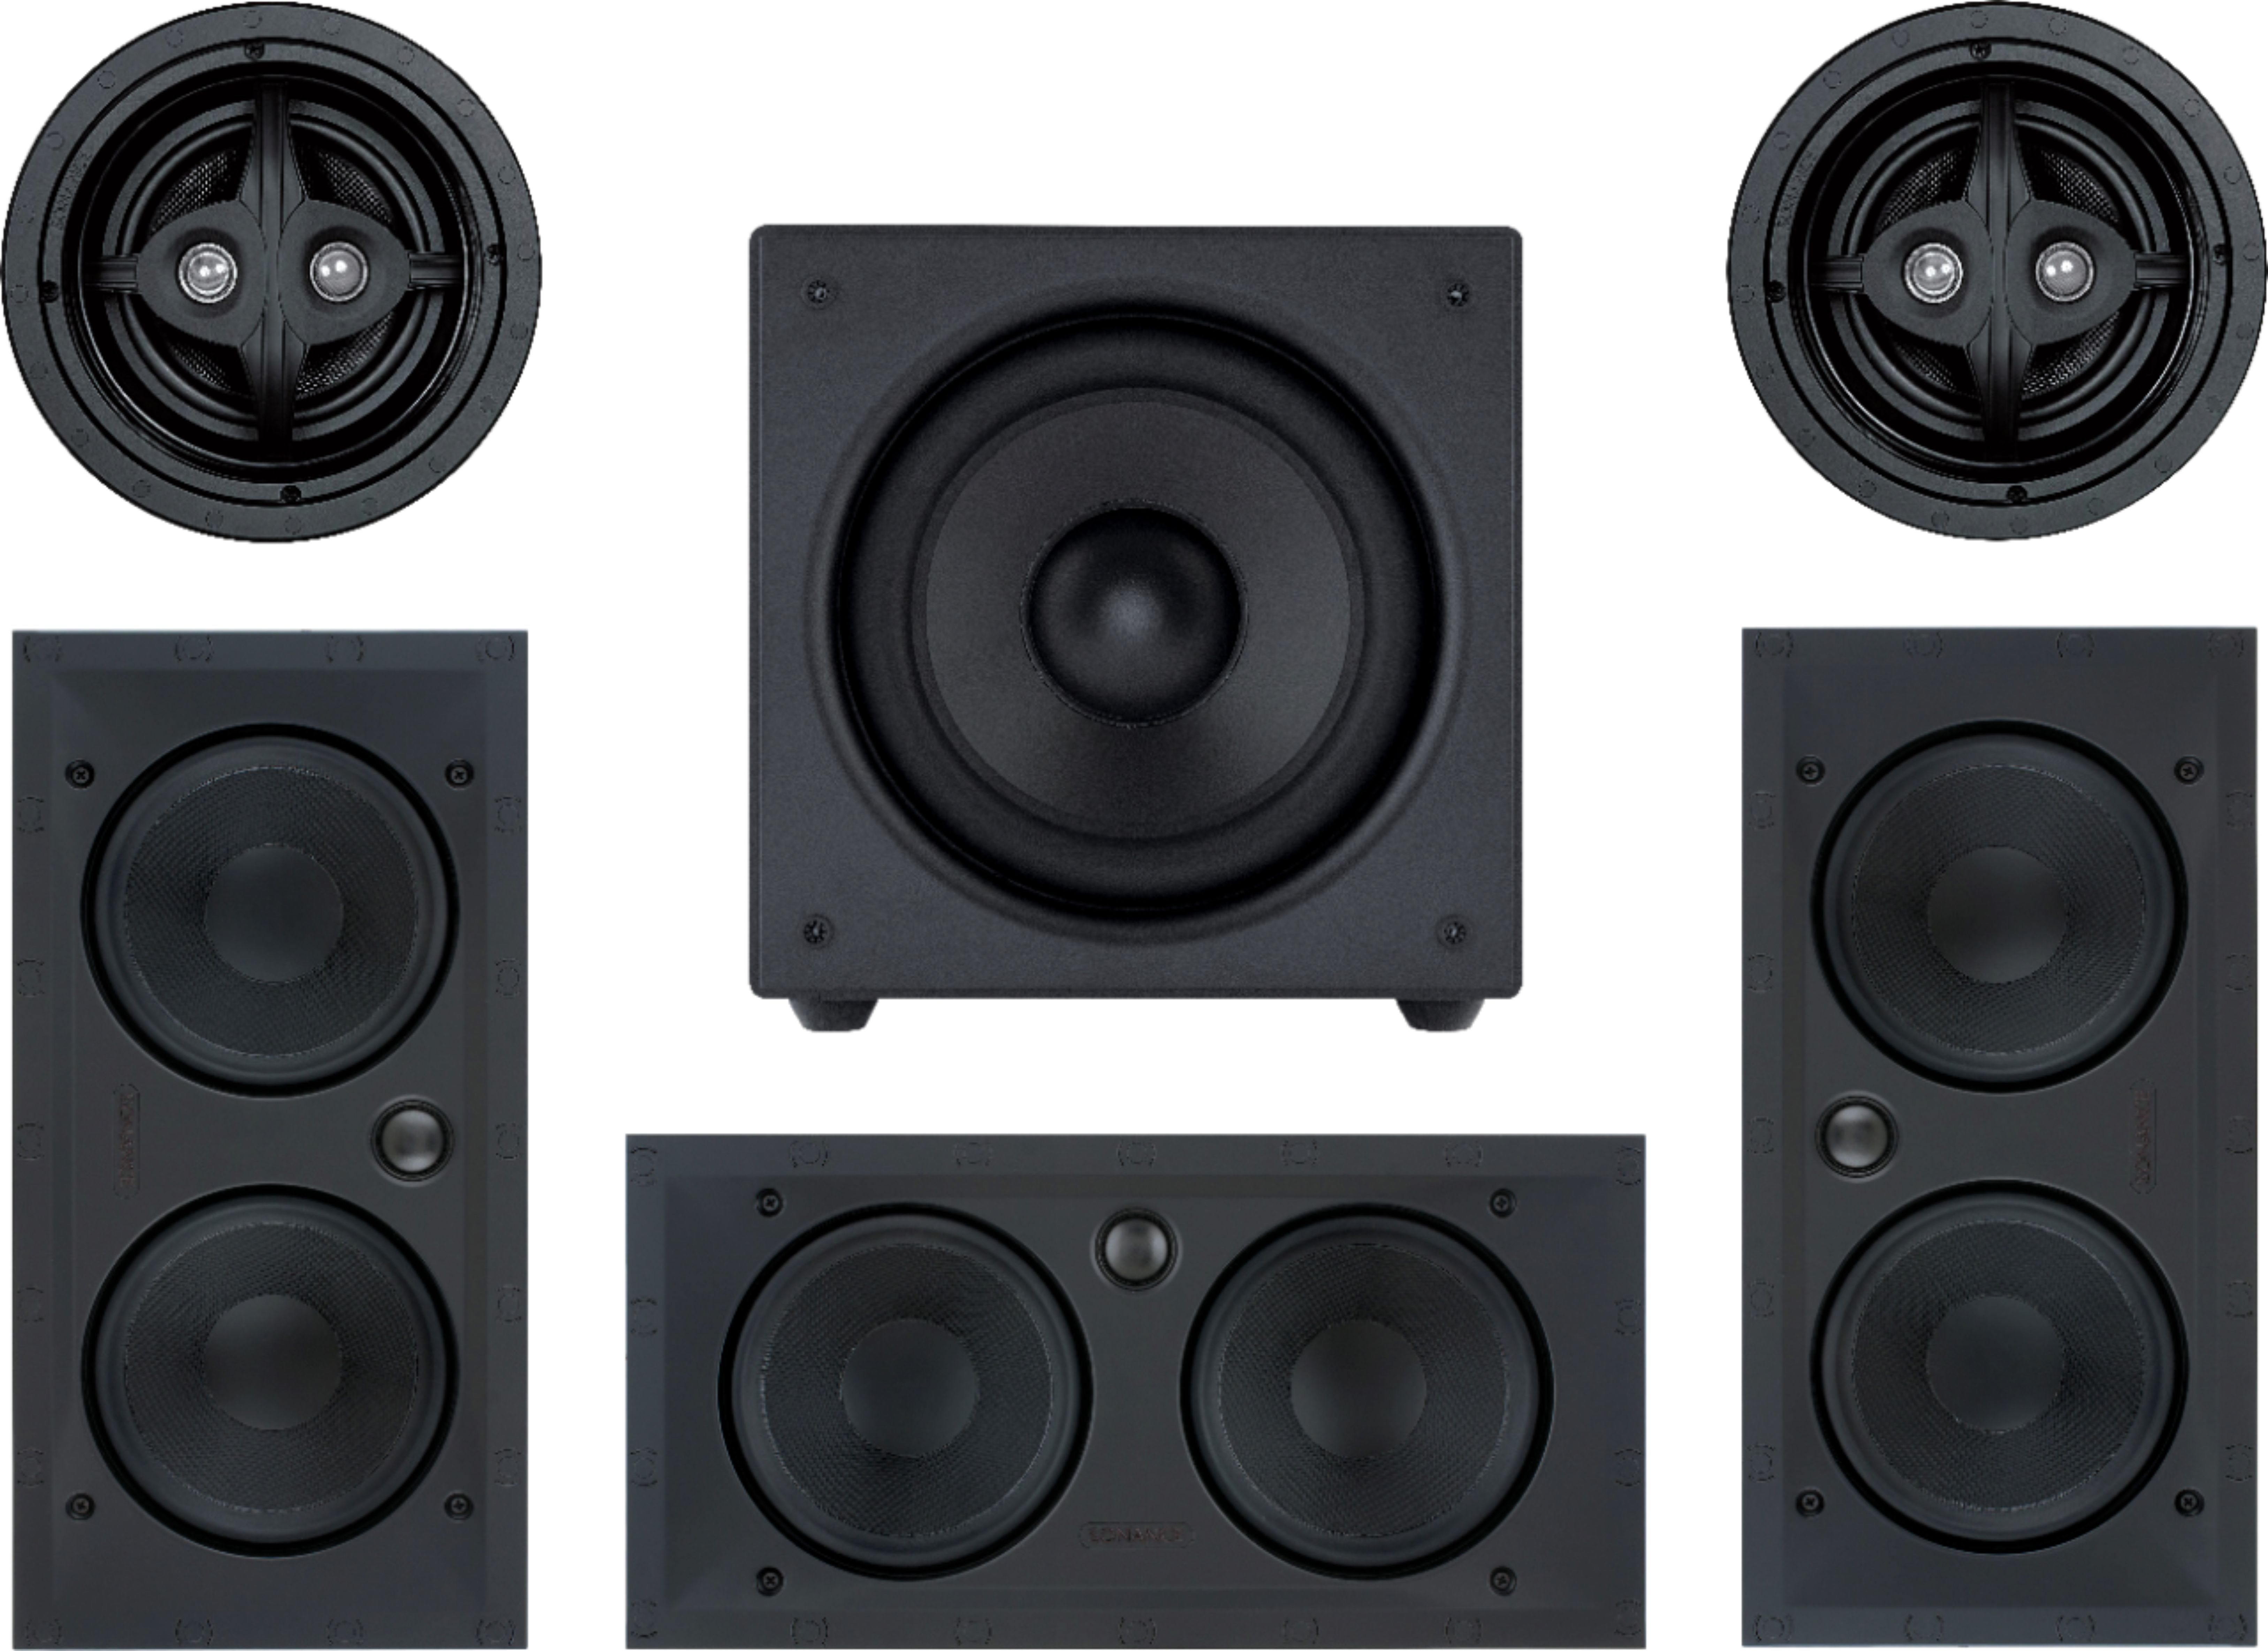 Compare Sonance MAG5.1 Premium 61/2" InWall Speaker System with Wireless Subwoofer